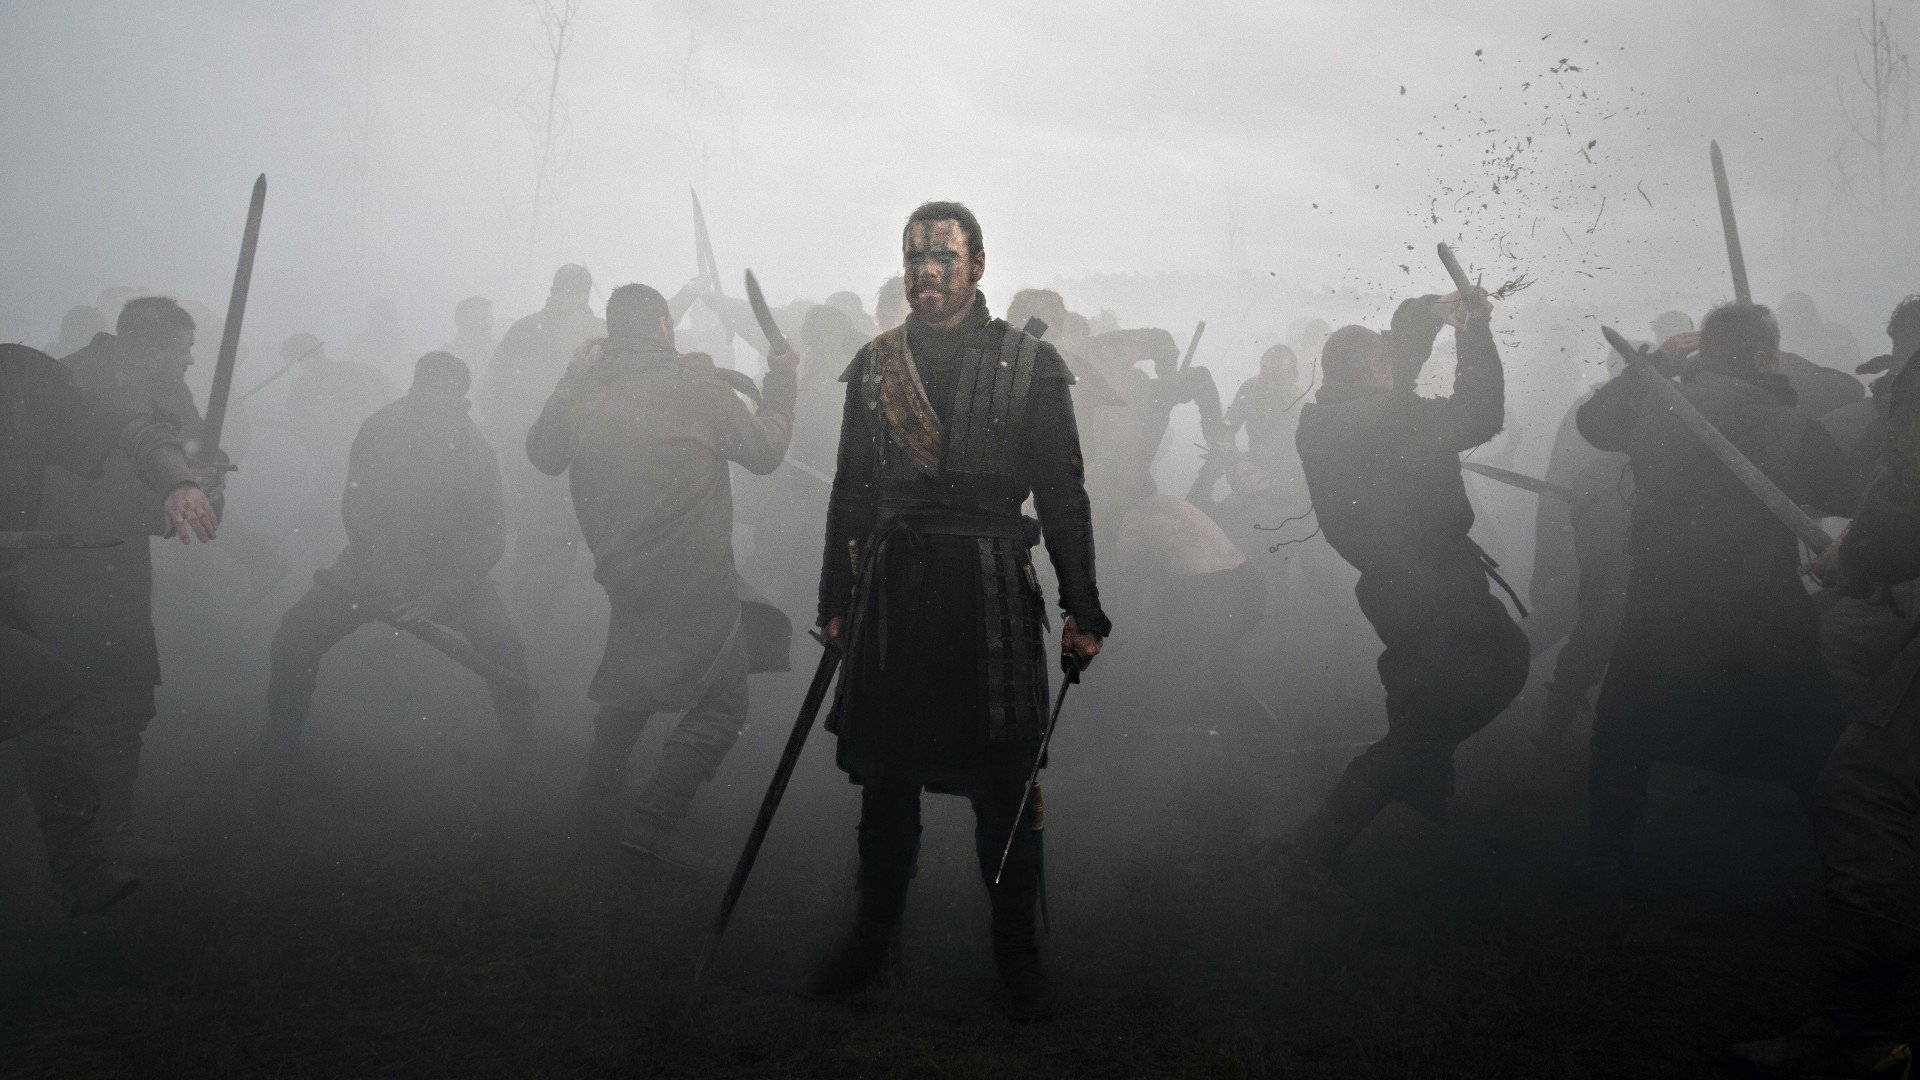 MACBETH Is An Effectively Grimy Shakespeare Adaptation